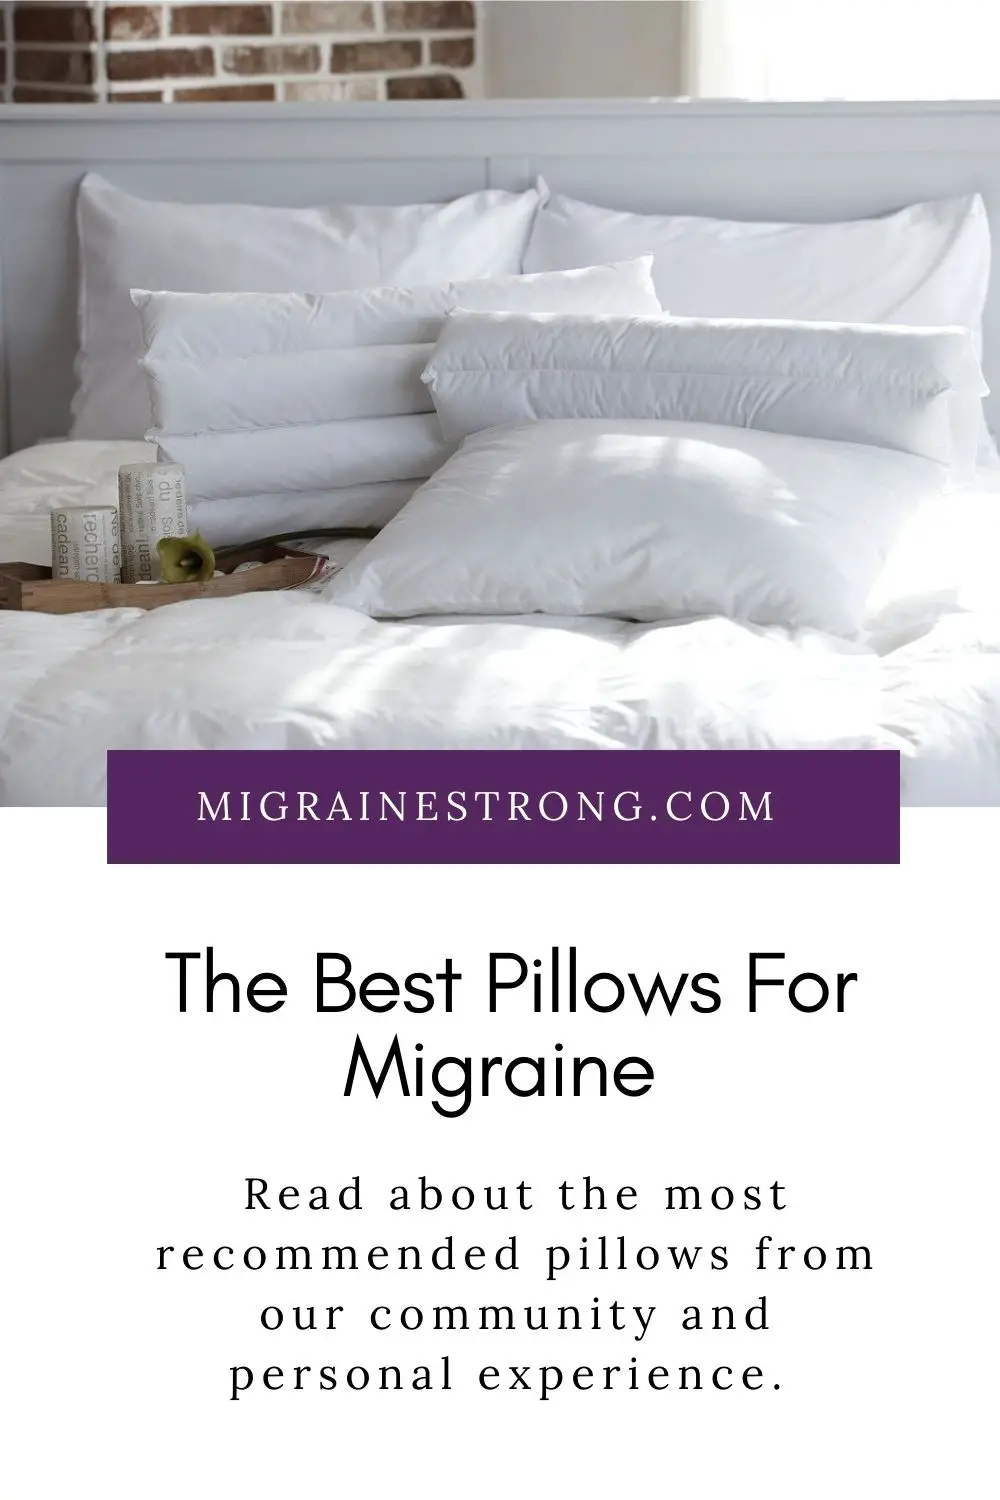 The Best Pillow For Migraine- Essential Info and Reviews